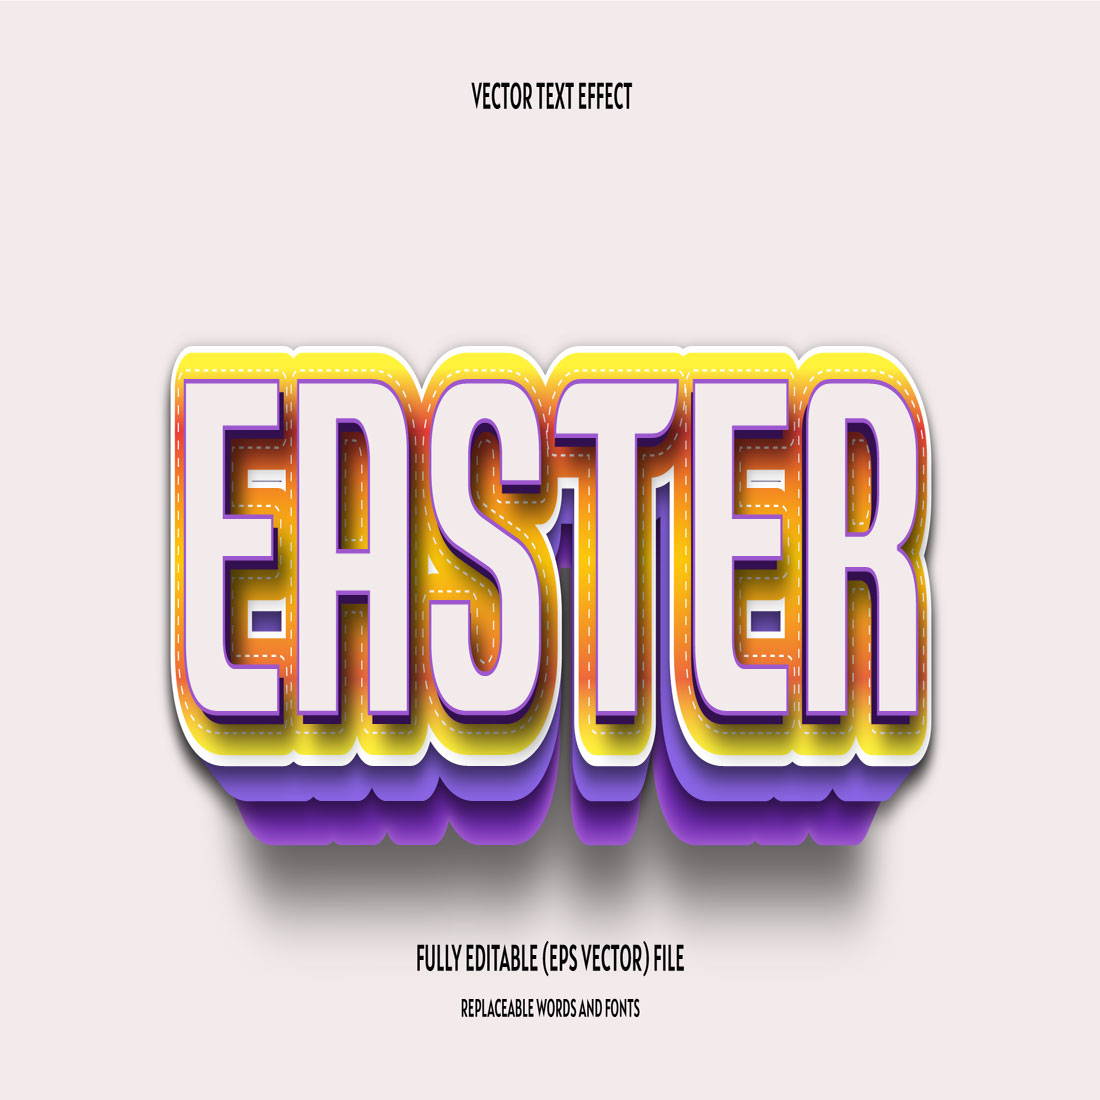 3d text style effect for Easter day cover image.